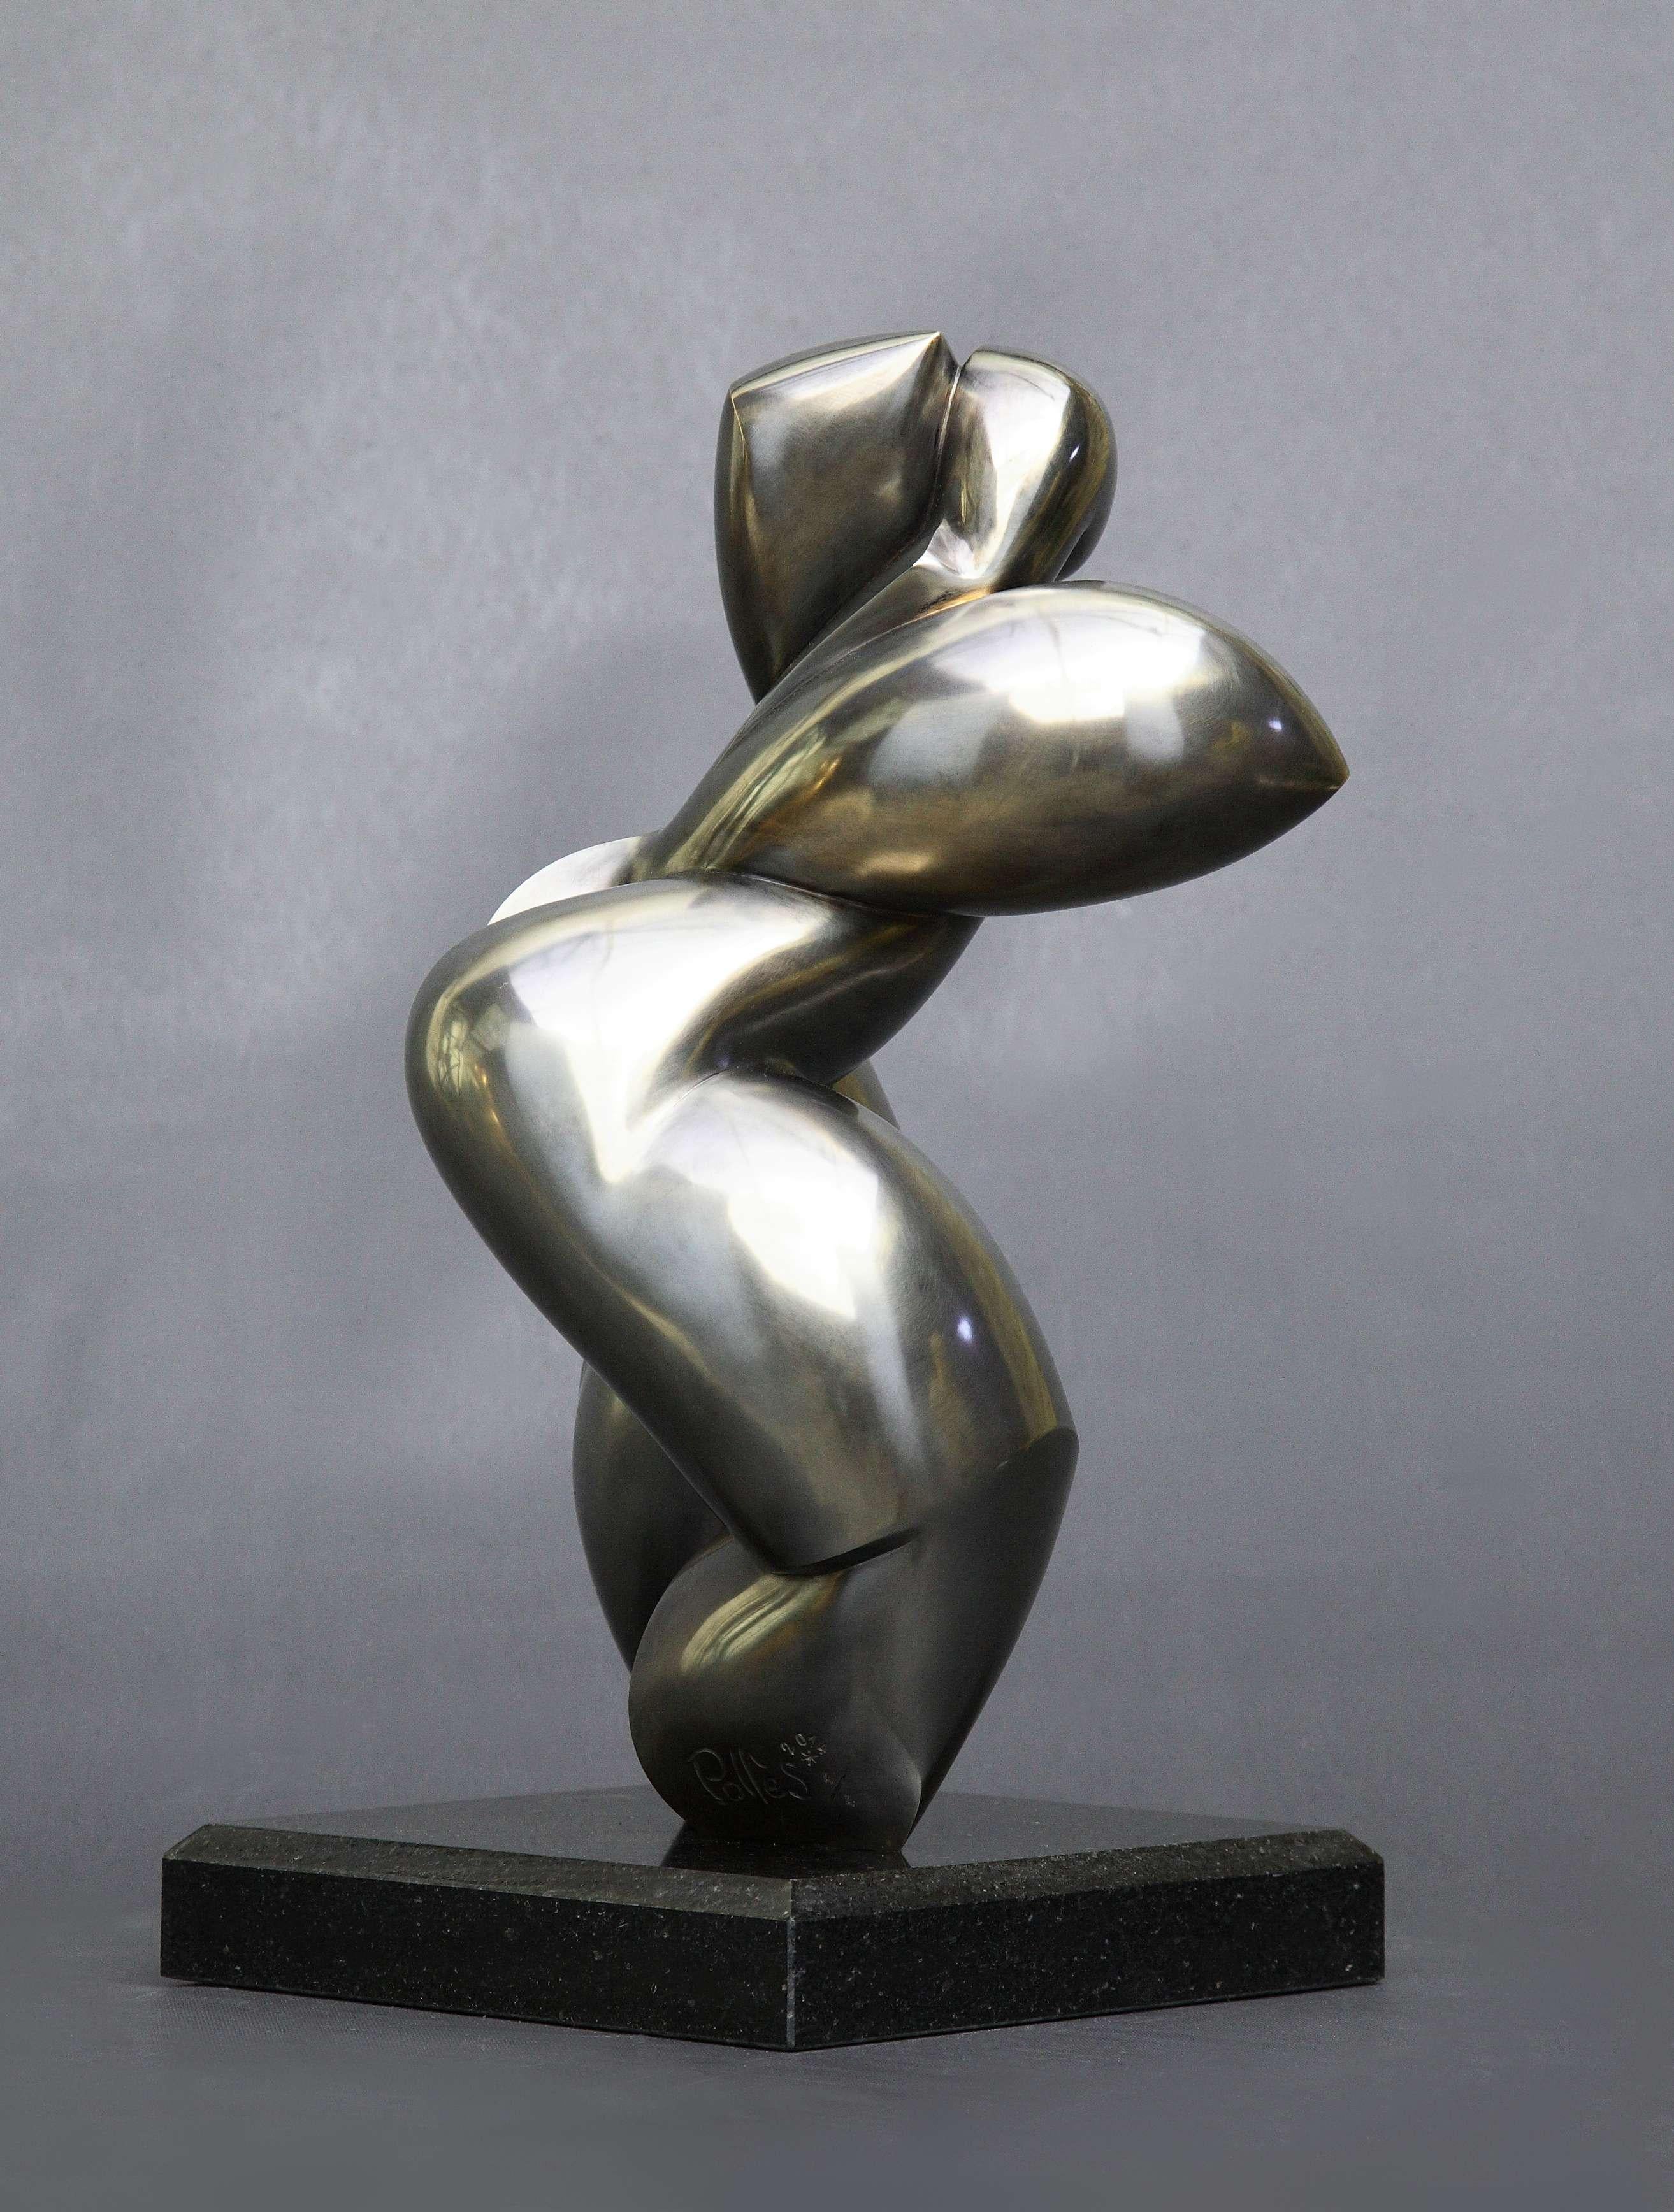 Pollès - Bronze Sculpture - Schweppsy
Bronze
4/4
Created in 2010, casted in 2014
42 x 22 x 20 cm
Signed and Numbered

BIOGRAPHY
Pollès was born in Paris in 1945
Like Leonard de Vinci in an anatomical search of perfection, of representation of